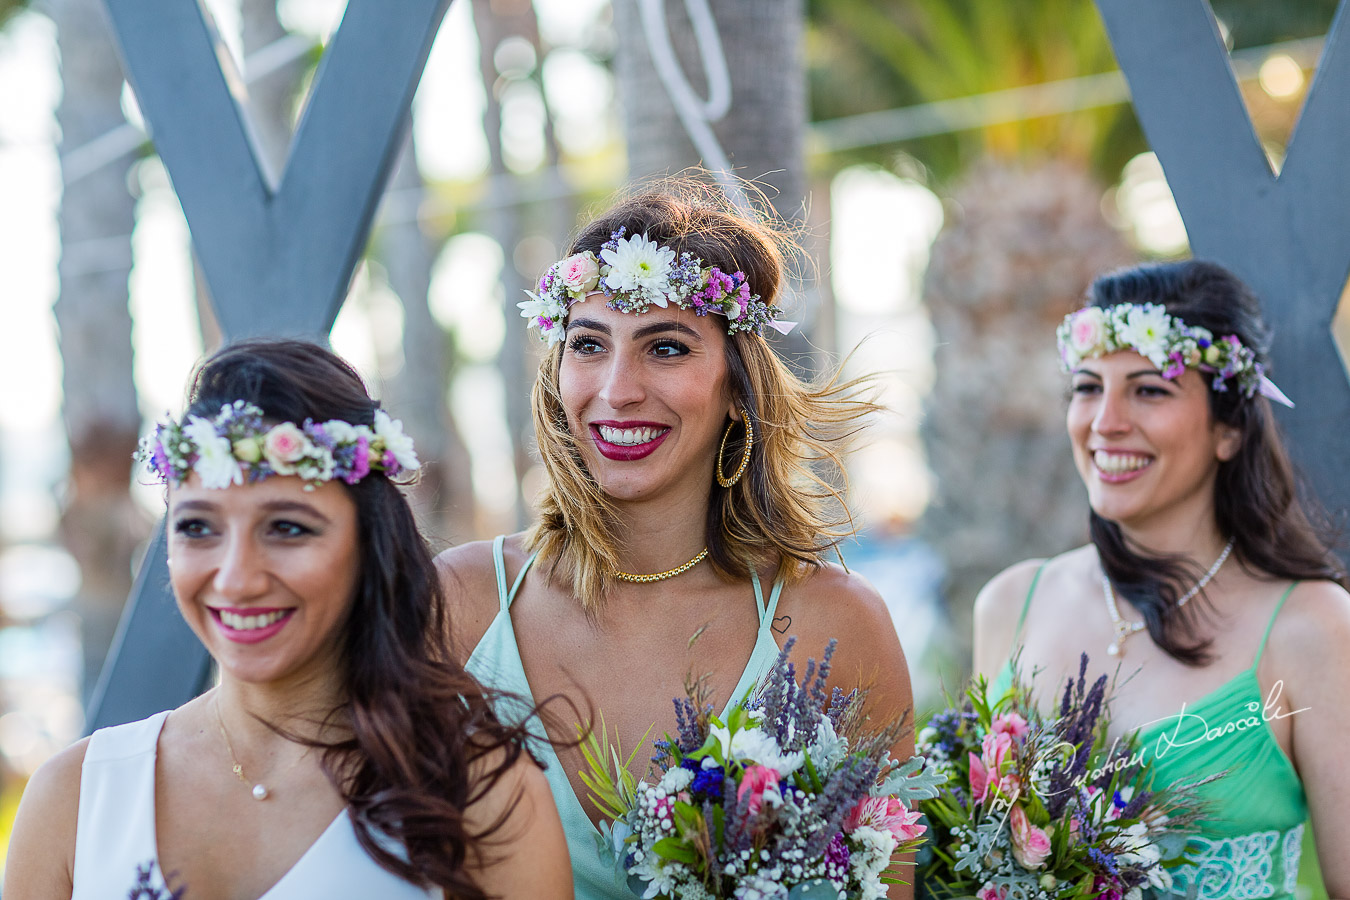 Genuine moments with the bridesmaids during the ceremony, as part of an Exclusive Wedding photography at Grand Resort Limassol, captured by Cyprus Wedding Photographer Cristian Dascalu.